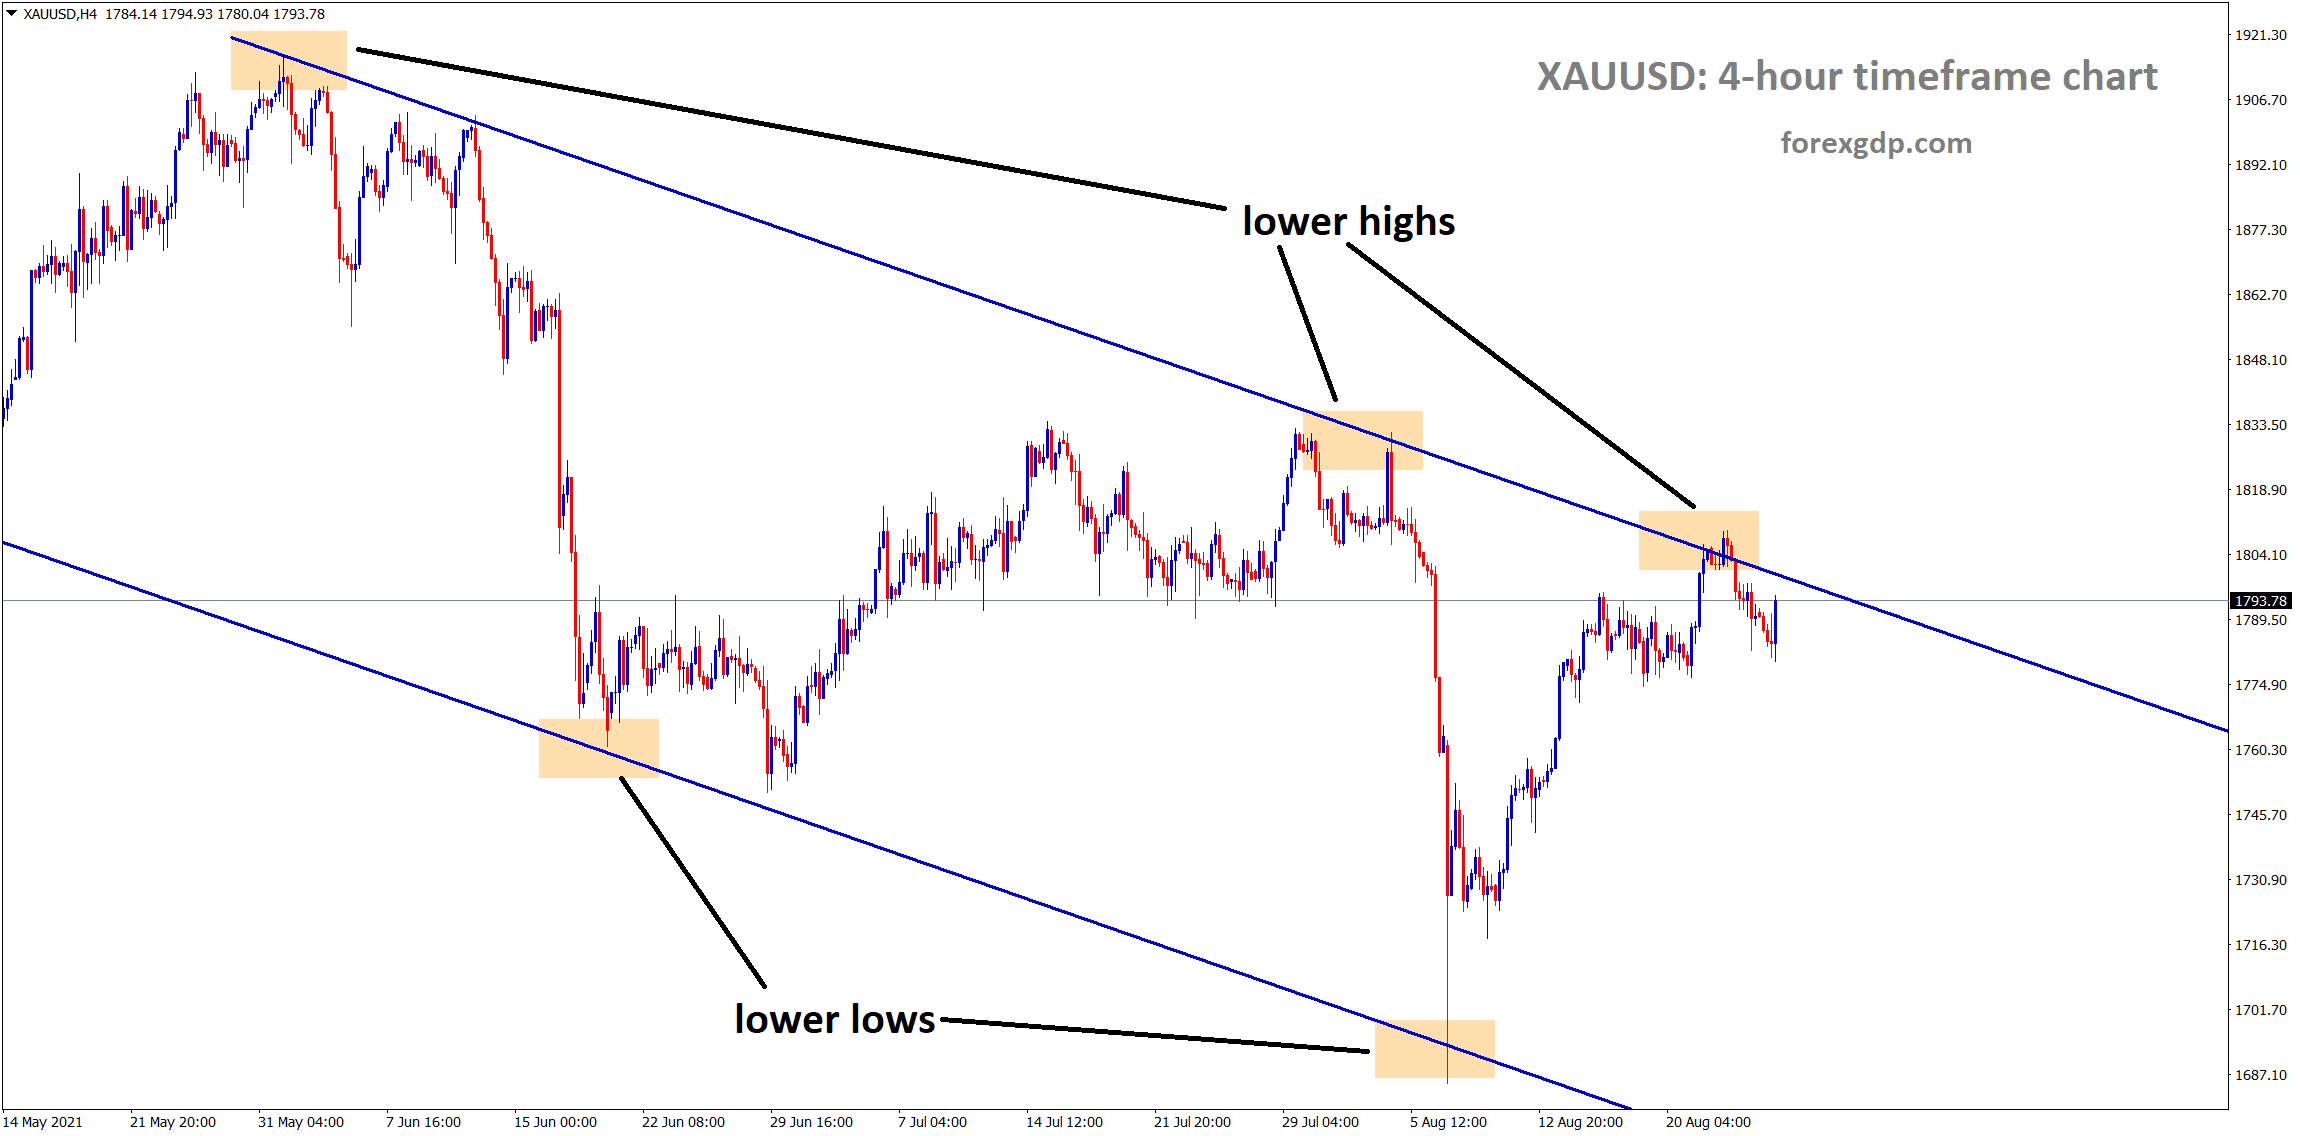 Gold is consolidating now at the lower high area of the descending channel